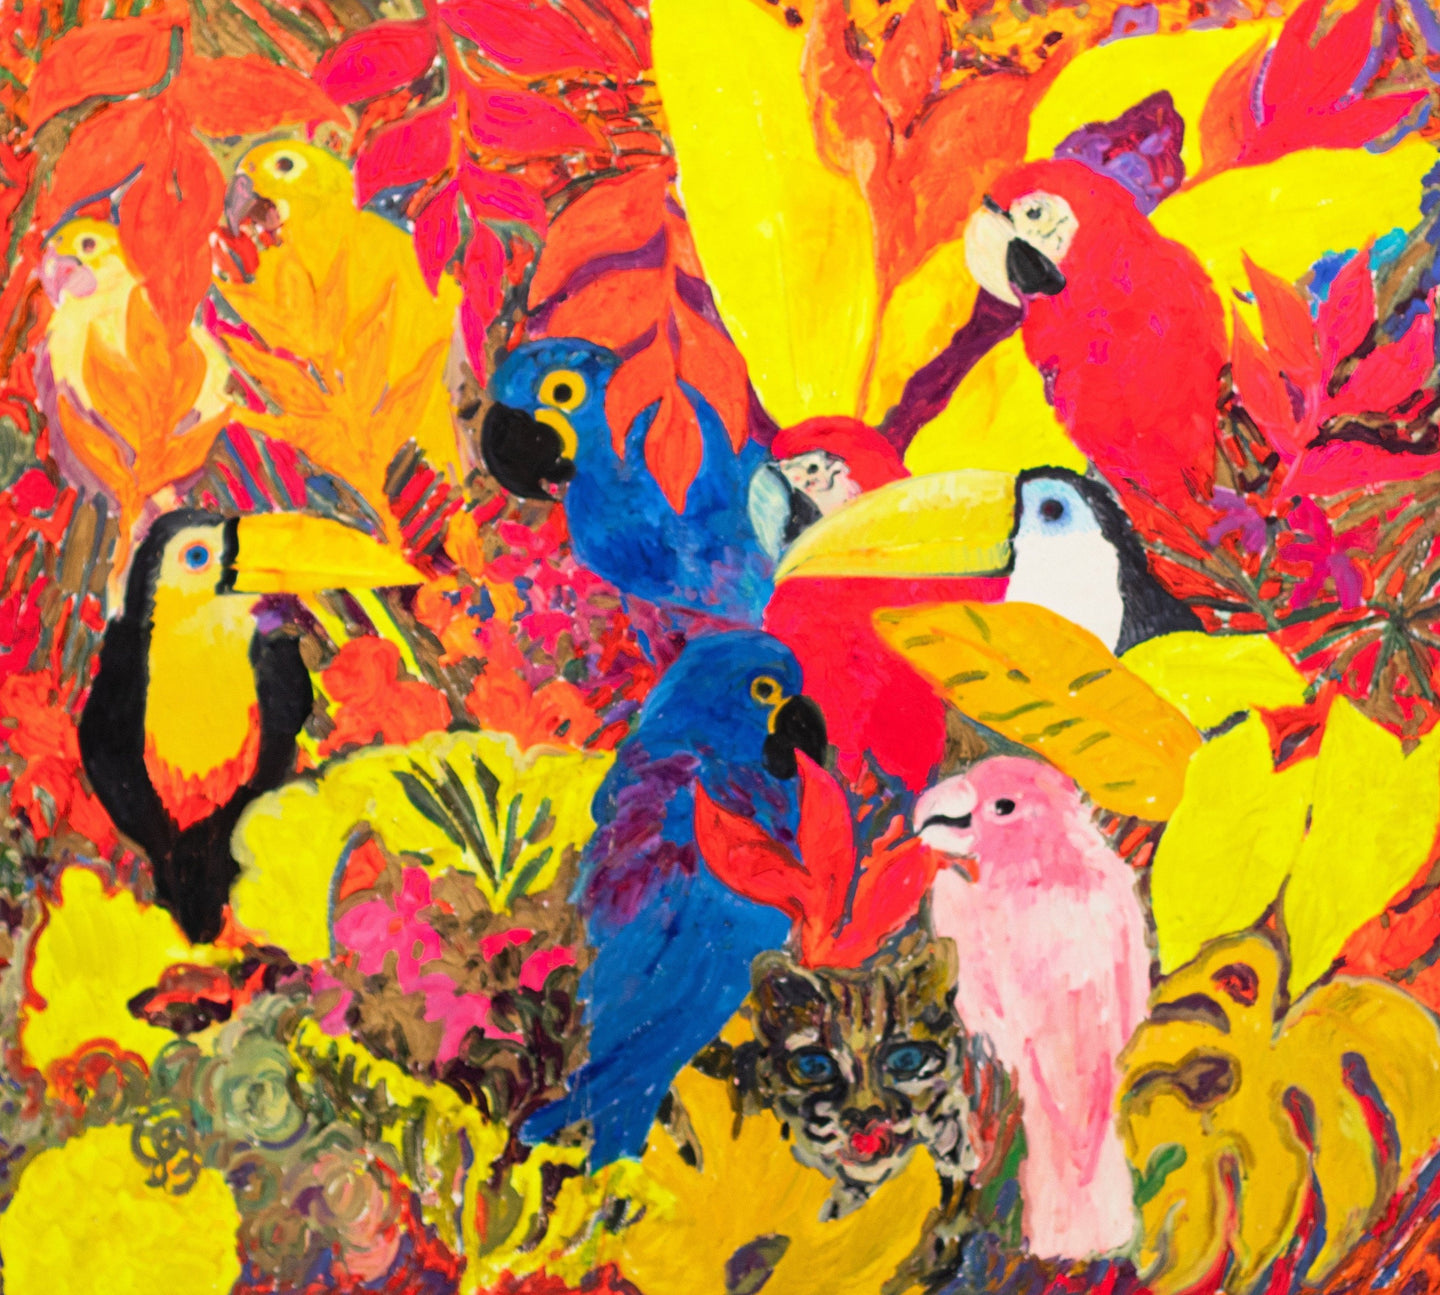 Hunt Slonem (b. 1951), Parrots, 1985, Oil on canvas, 66 x 44 inches. Hunt Slonem's paintings are at once vibrant, energetic and colorful, yet also deeply spiritual and contemplative. The artist creates exotic forms with expressive and highly textural brushstrokes that are full of intense color, loosely inspired by artists of the German Expressionism movement. Available at Manolis Projects Gallery